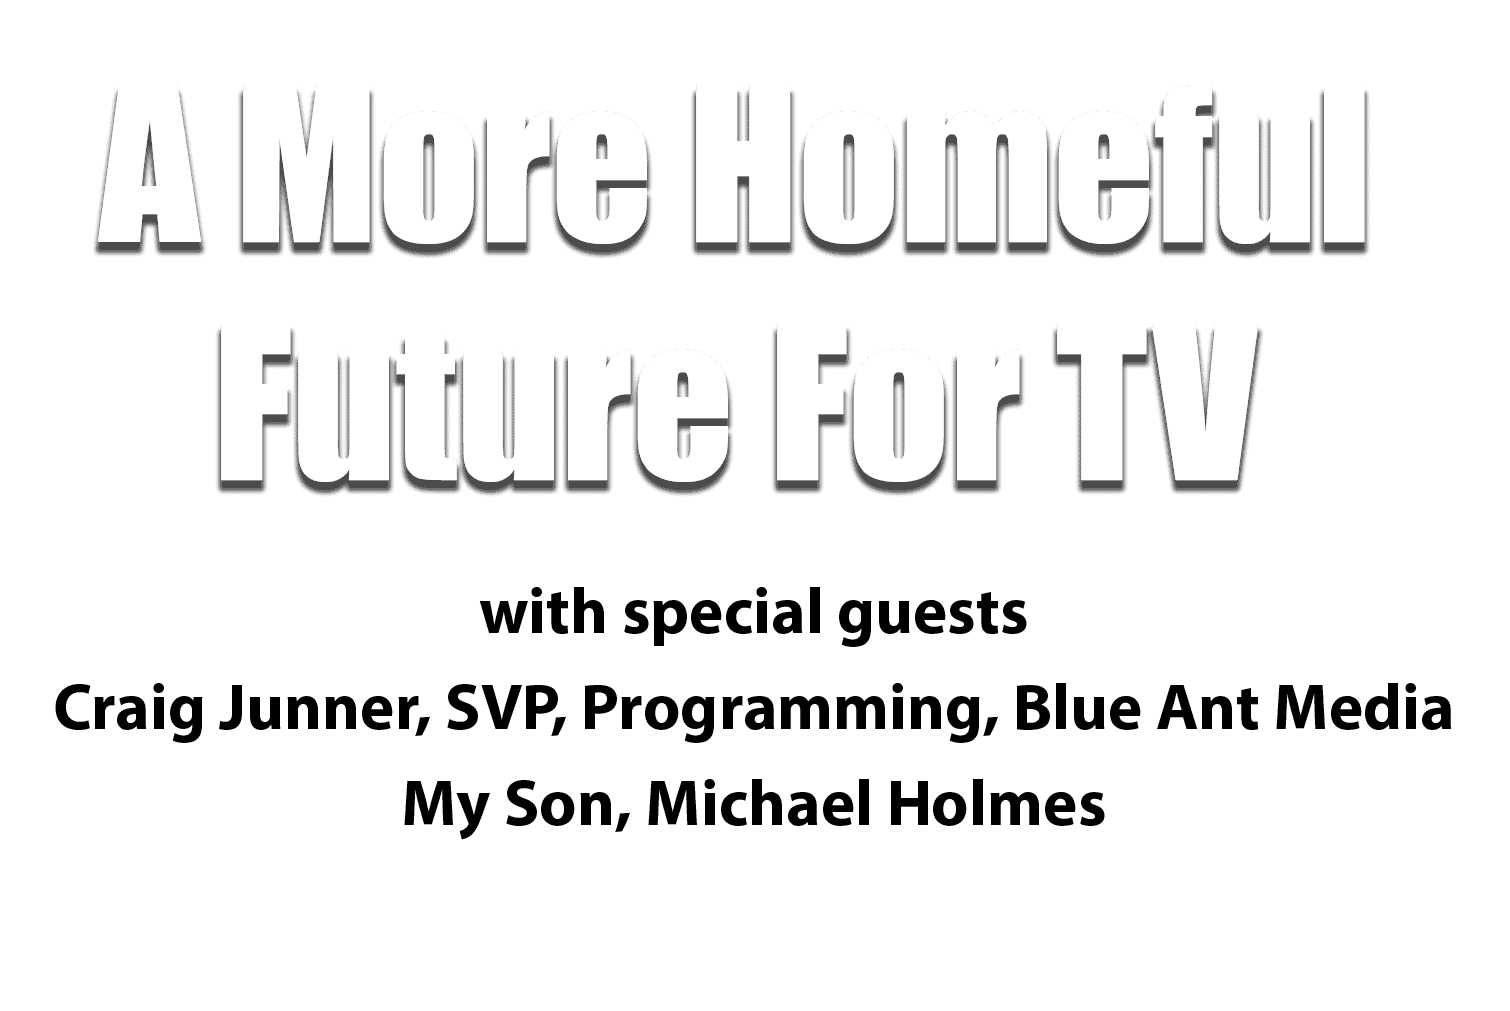 A More Homeful Future For TV - Holmes On Homes Podcast Season 2, Episode 7